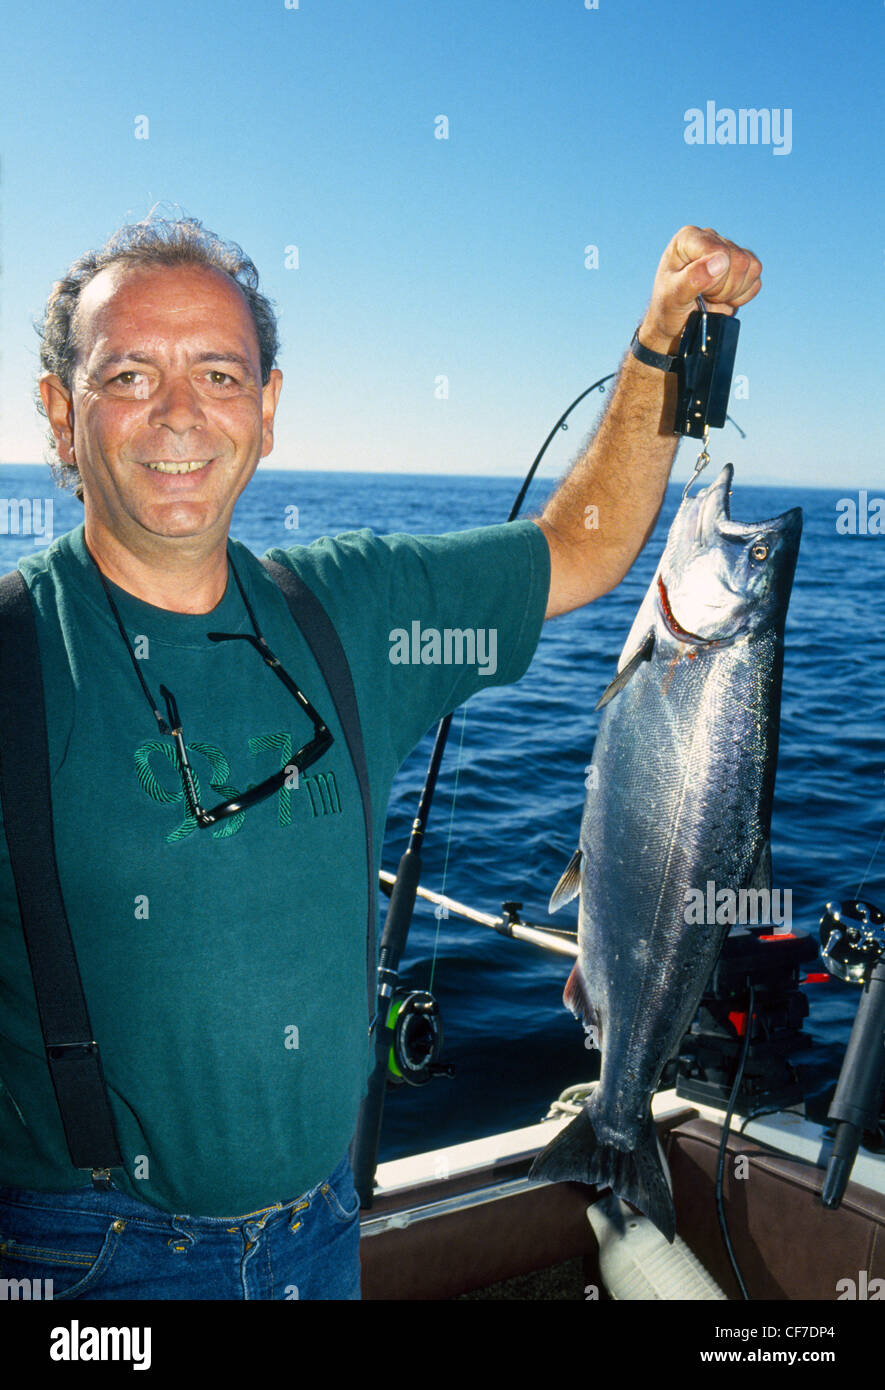 A fisherman proudly displays the silvery chinook salmon he caught from a sportfishing charter boat near Vancouver in British Columbia, Canada. Stock Photo